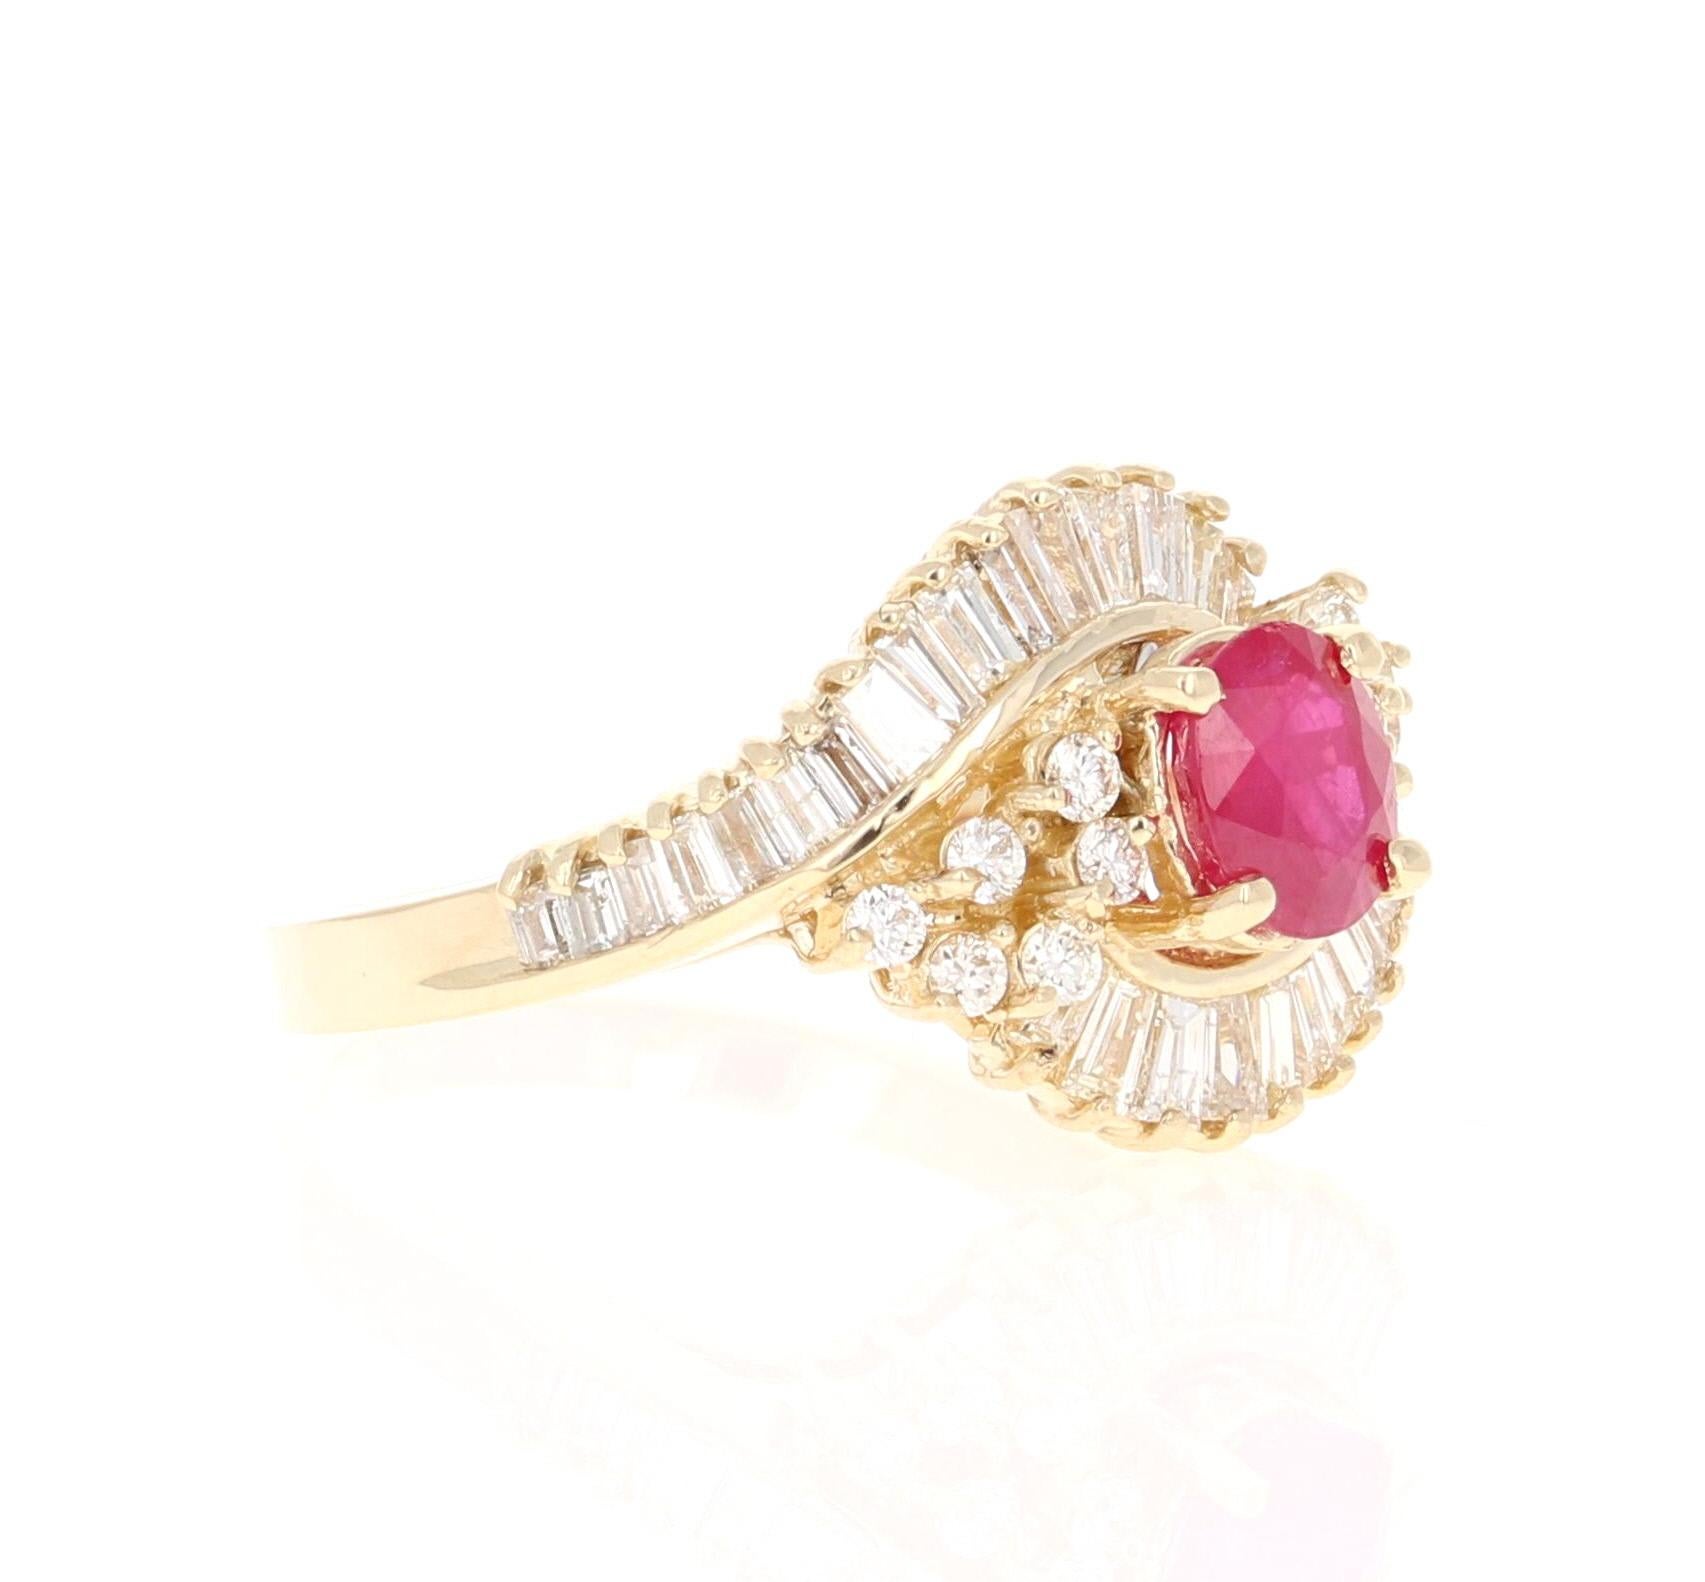 This gorgeous Ruby Diamond Ballerina Ring has round and baguette cut diamonds floating around the center Ruby just like a charming ballerina would! The Ruby is 1.00 Carat surrounded by 12 Round Cut Diamonds that weigh 0.22 Carats, and 32 Baguette